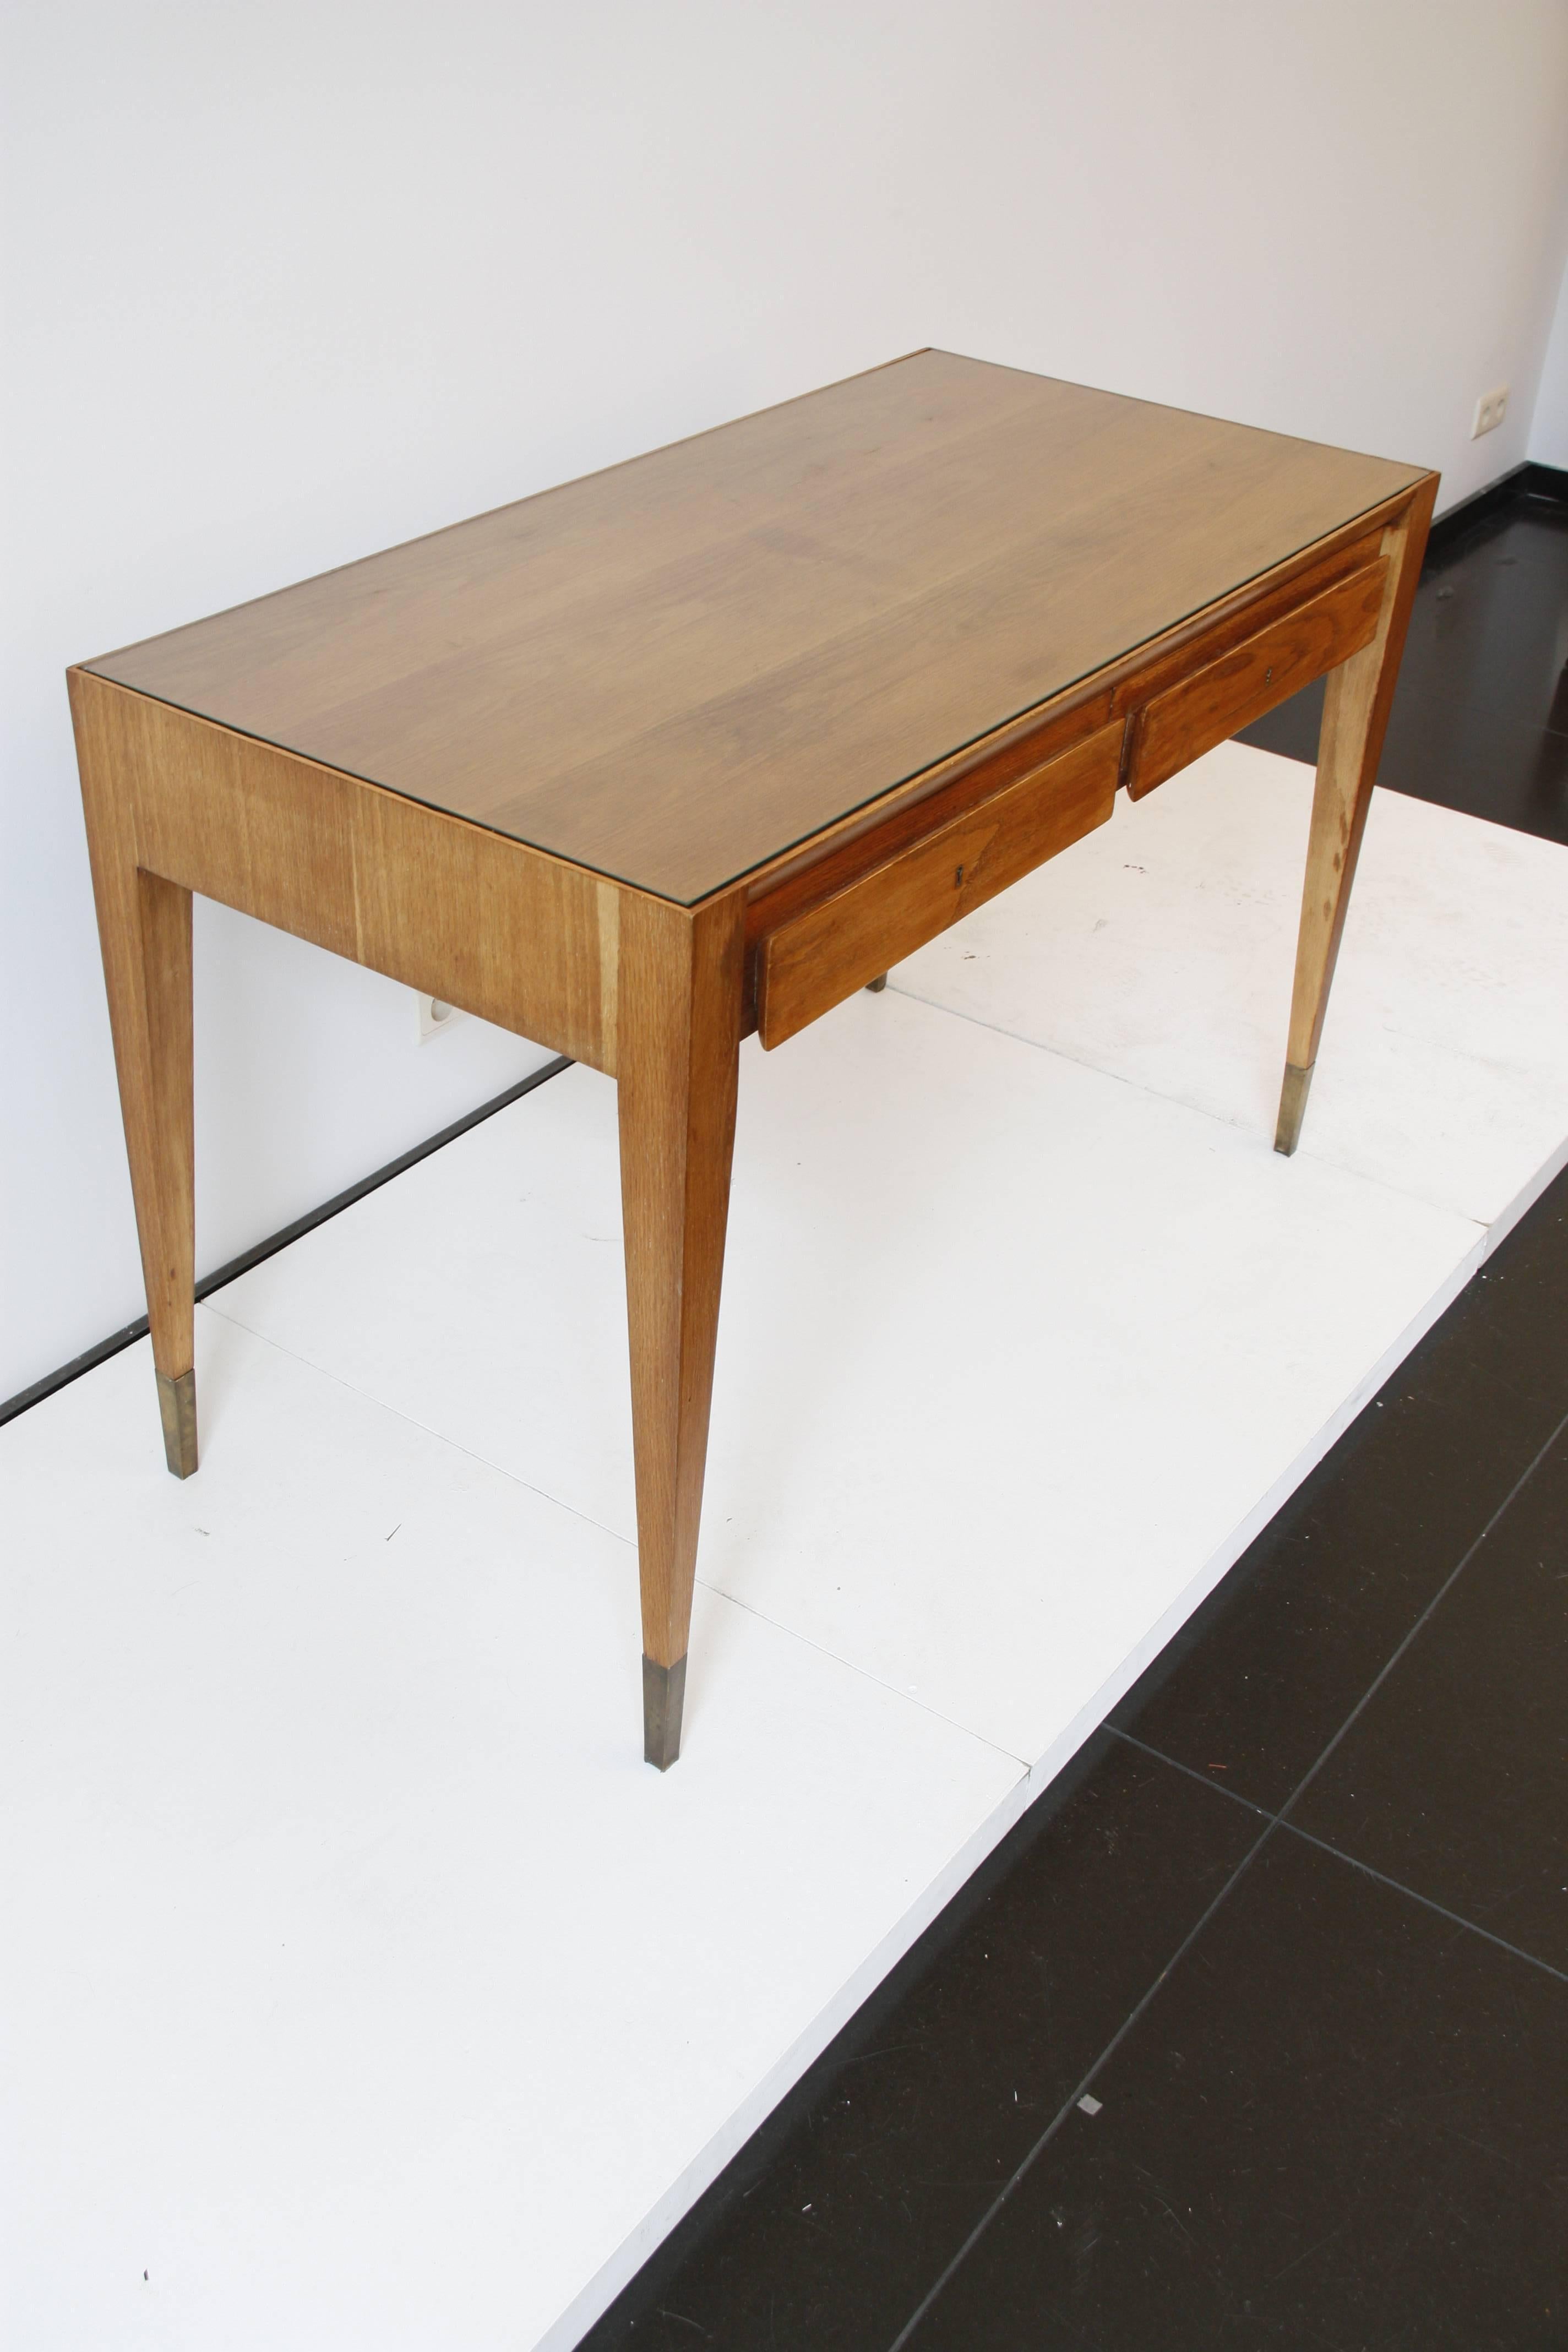 Mid-Century Modern Italian Vintage Clear Oak Desk with Drawers by Gio Ponti, circa 1950 For Sale